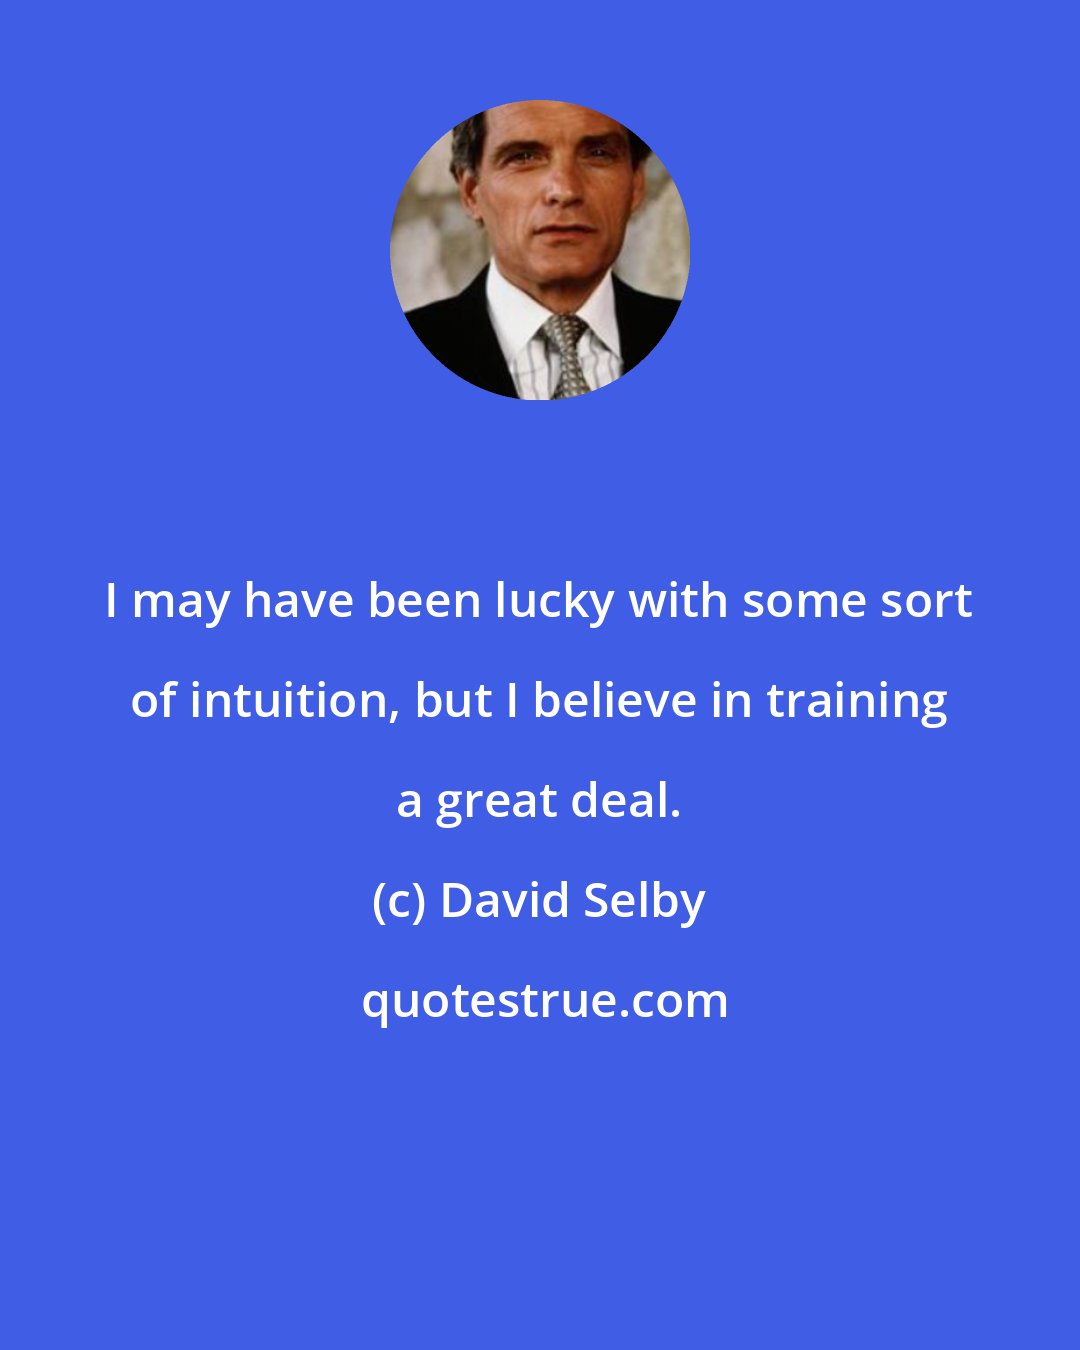 David Selby: I may have been lucky with some sort of intuition, but I believe in training a great deal.